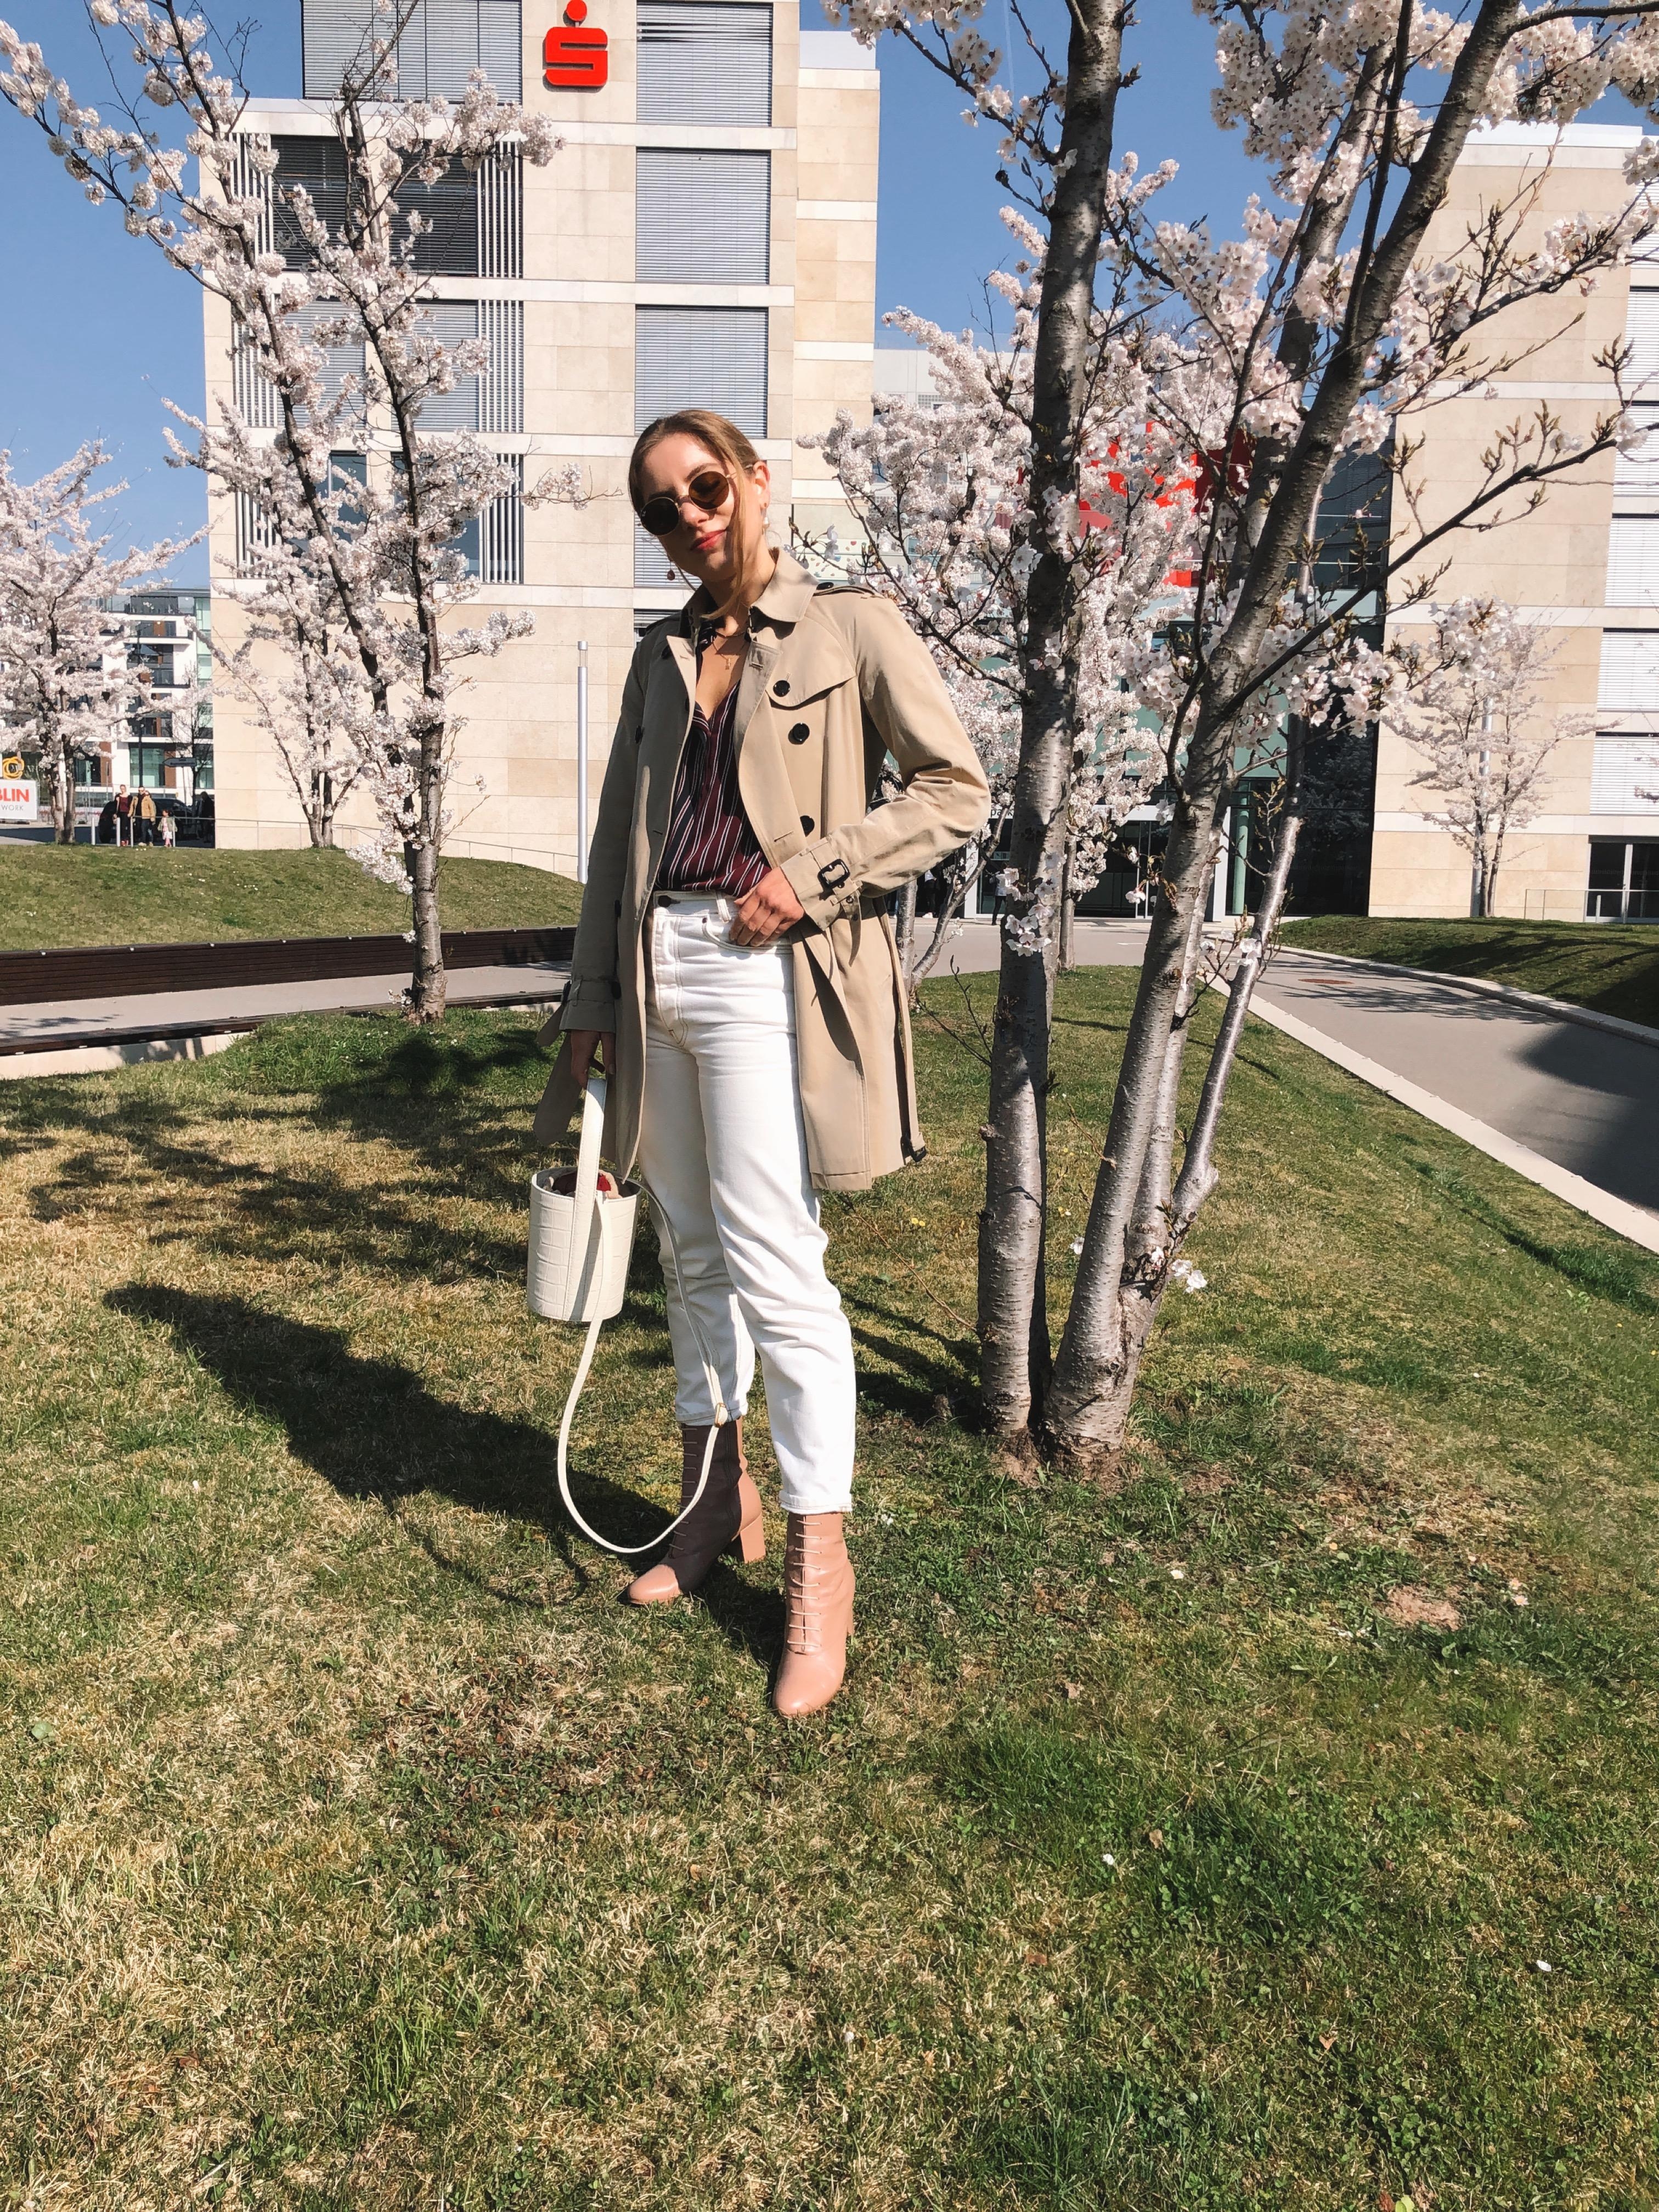 Trench weather! #classictrench #burberrytrench #whitejeans  #bucketbag #staud